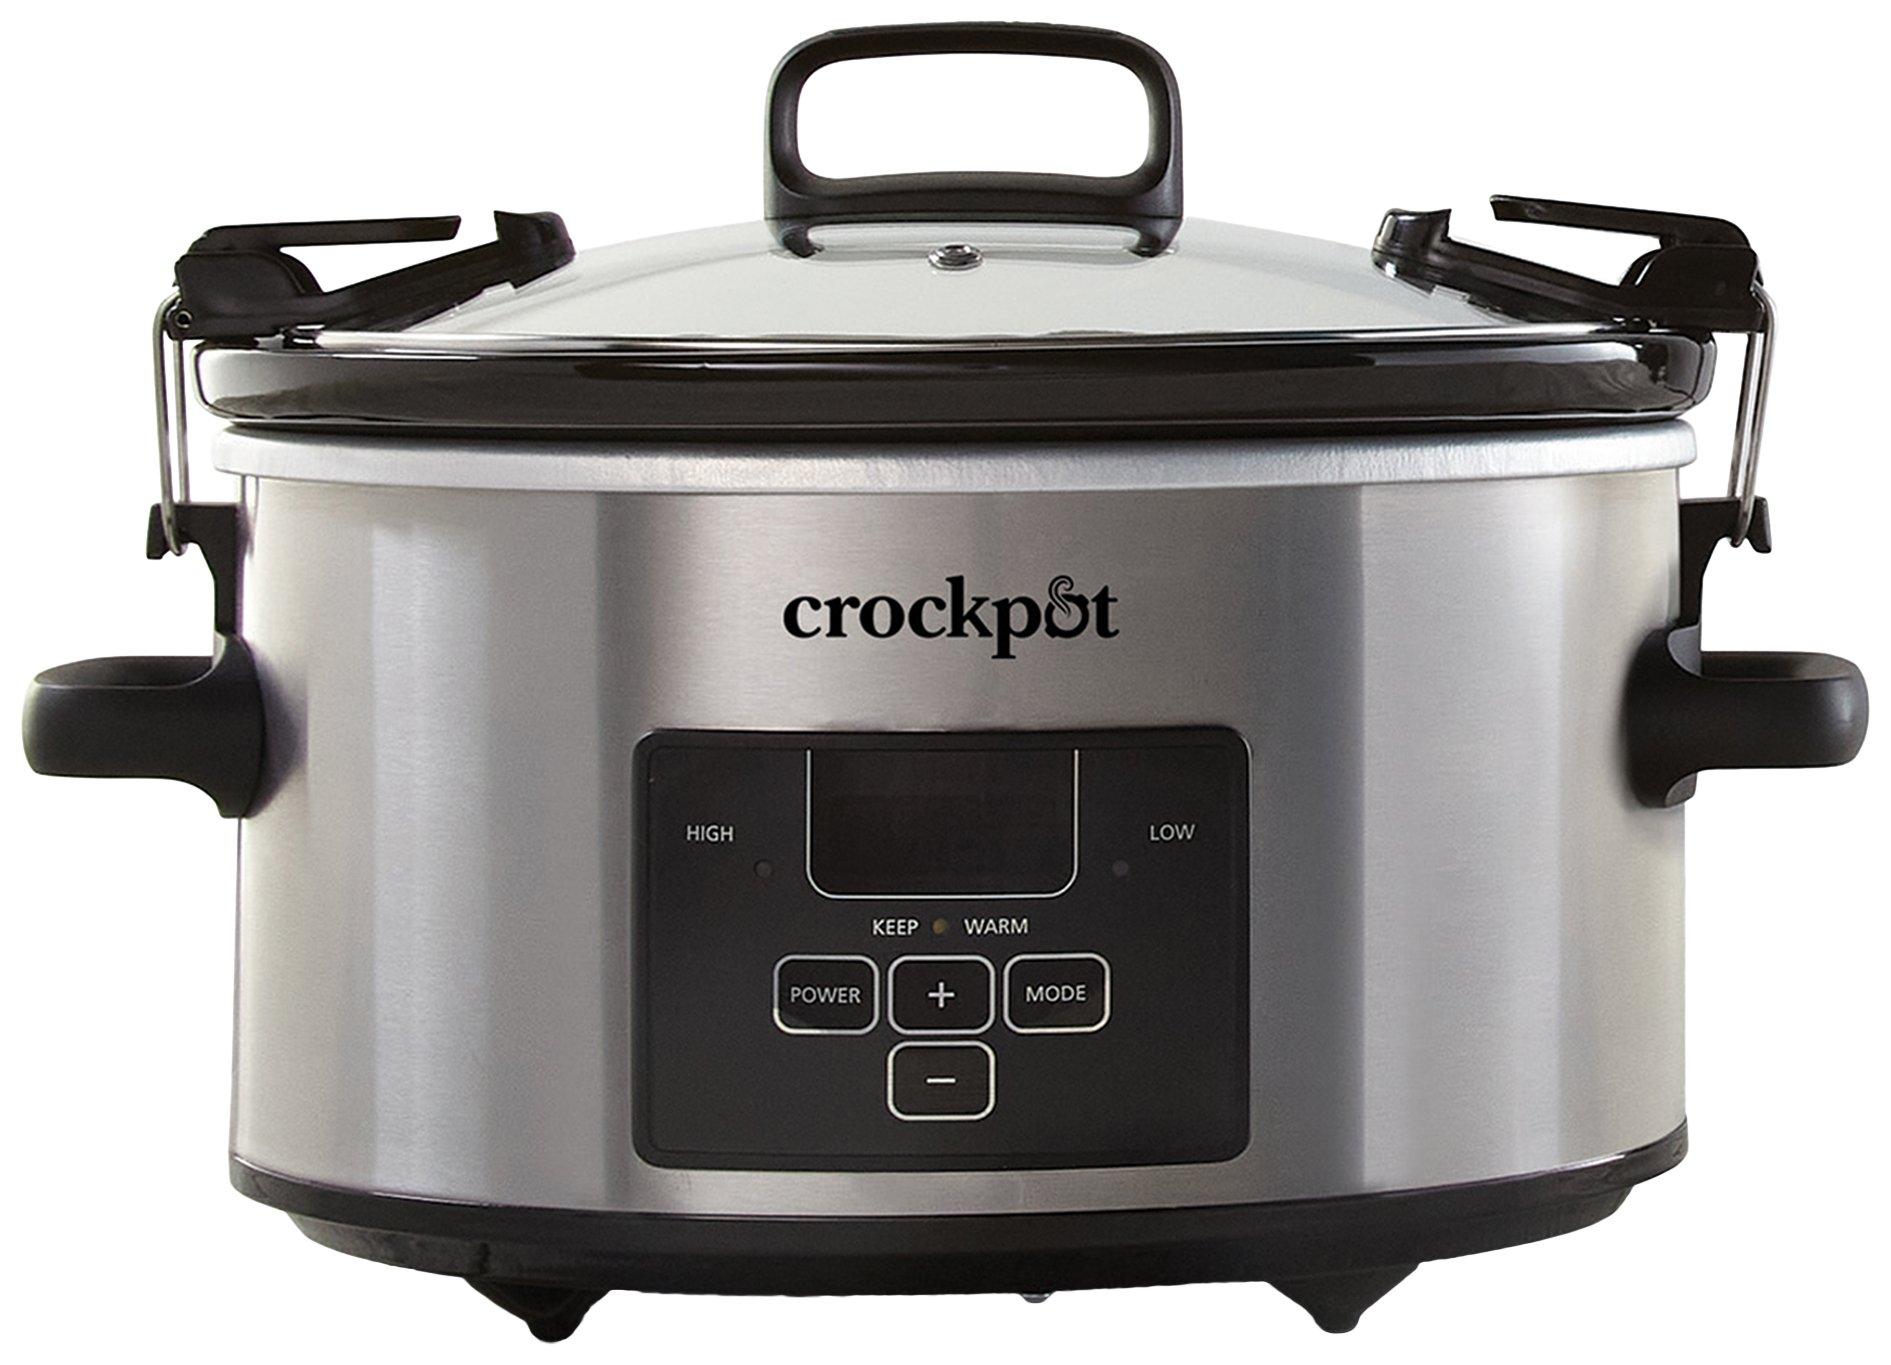 Toastmaster 4 Qt Brushed Stainless Steel Slow Cooker